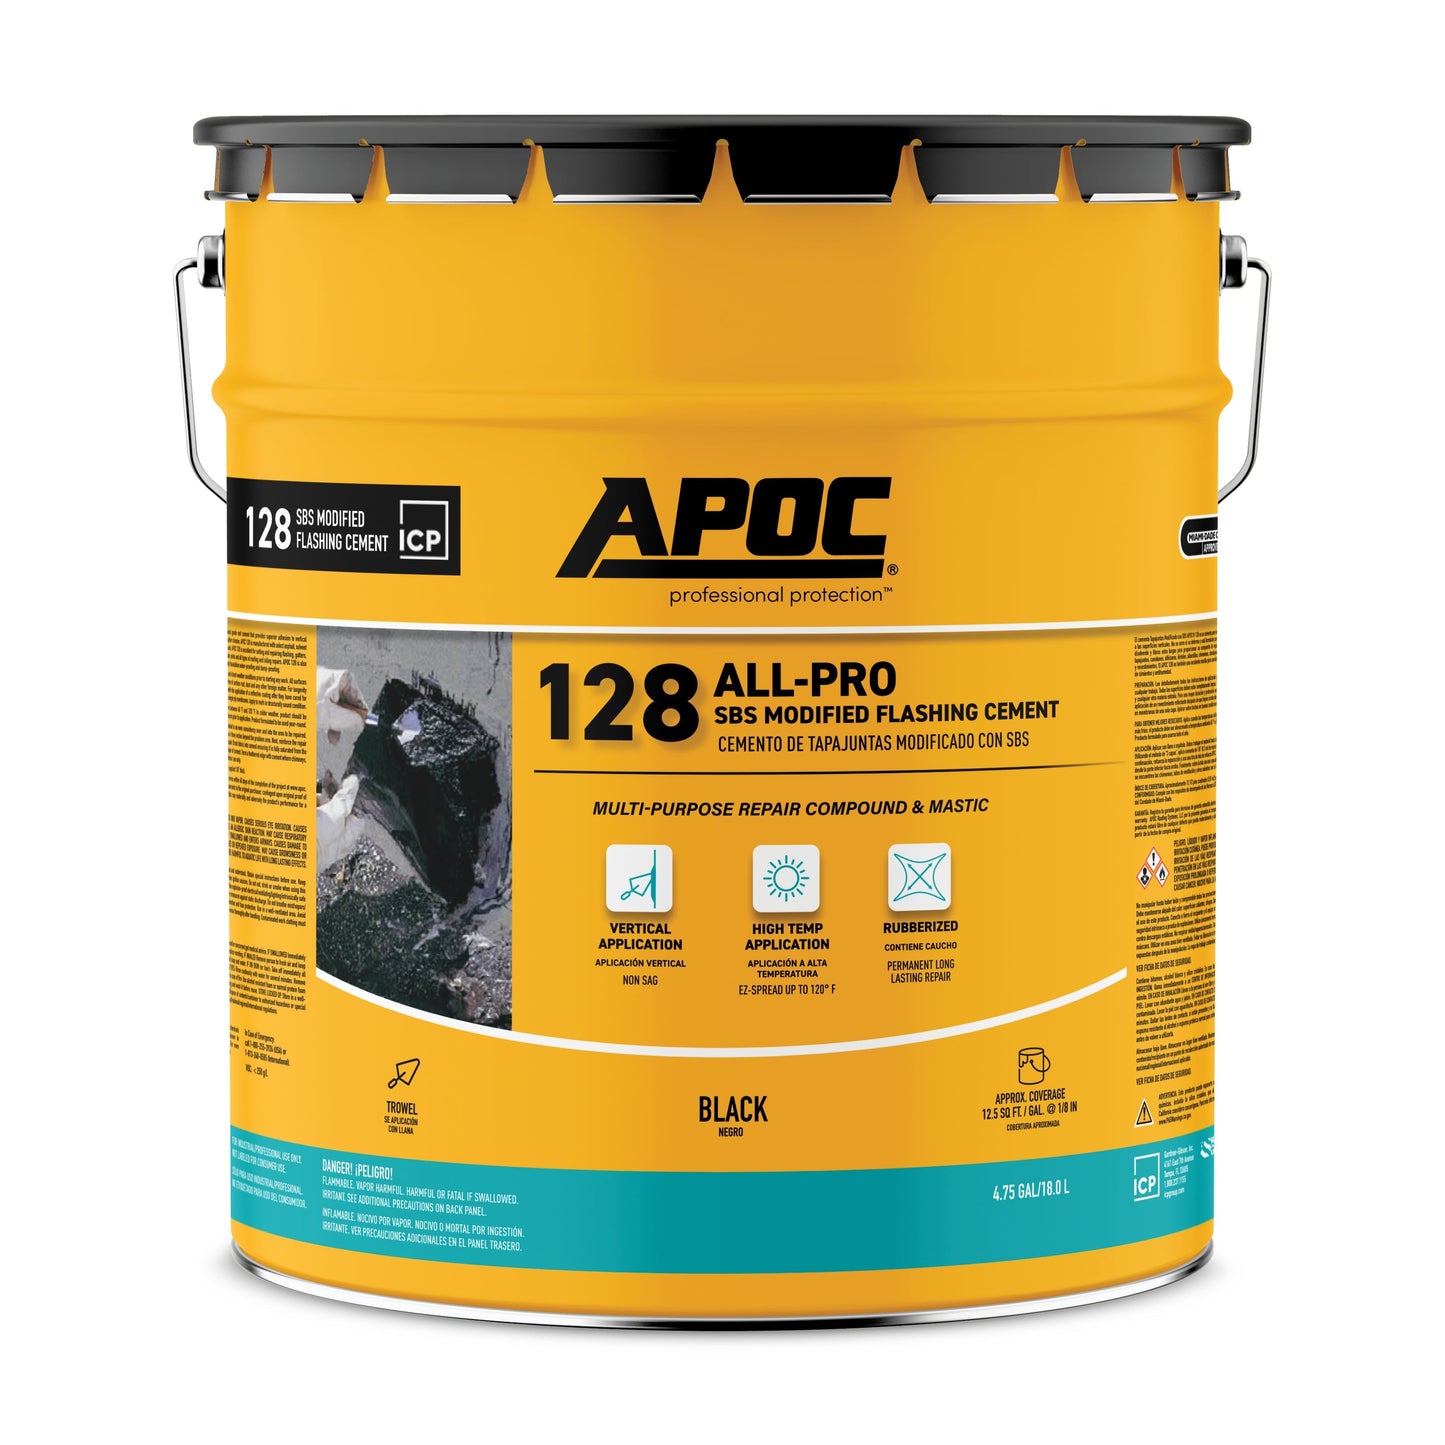 APOC<sup>®</sup> 128 All-Pro SBS Modified Flashing Cement